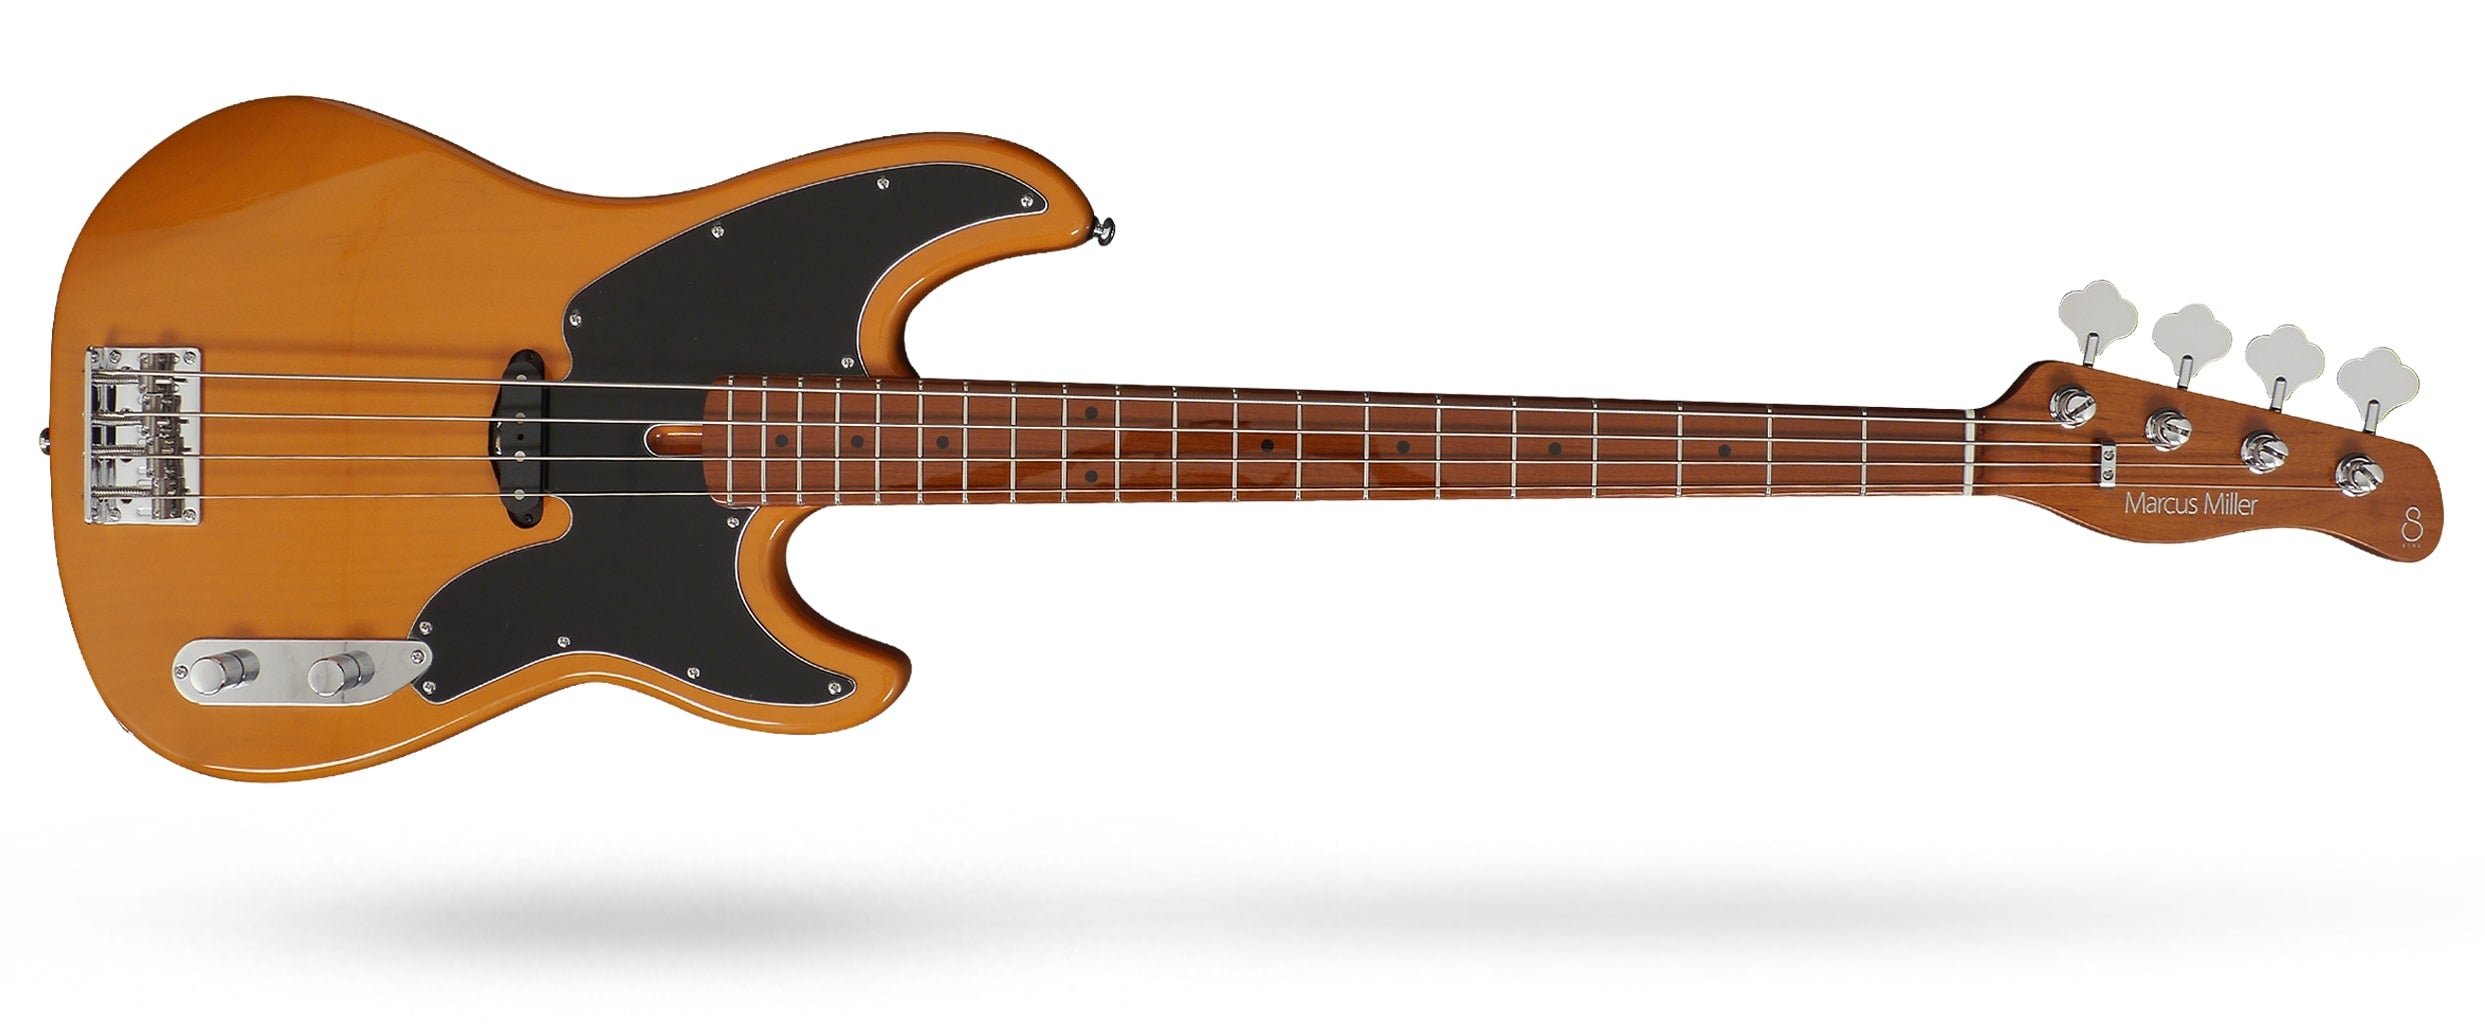 Sire Marcus Miller D5 Electric Bass in Butterscotch Blonde